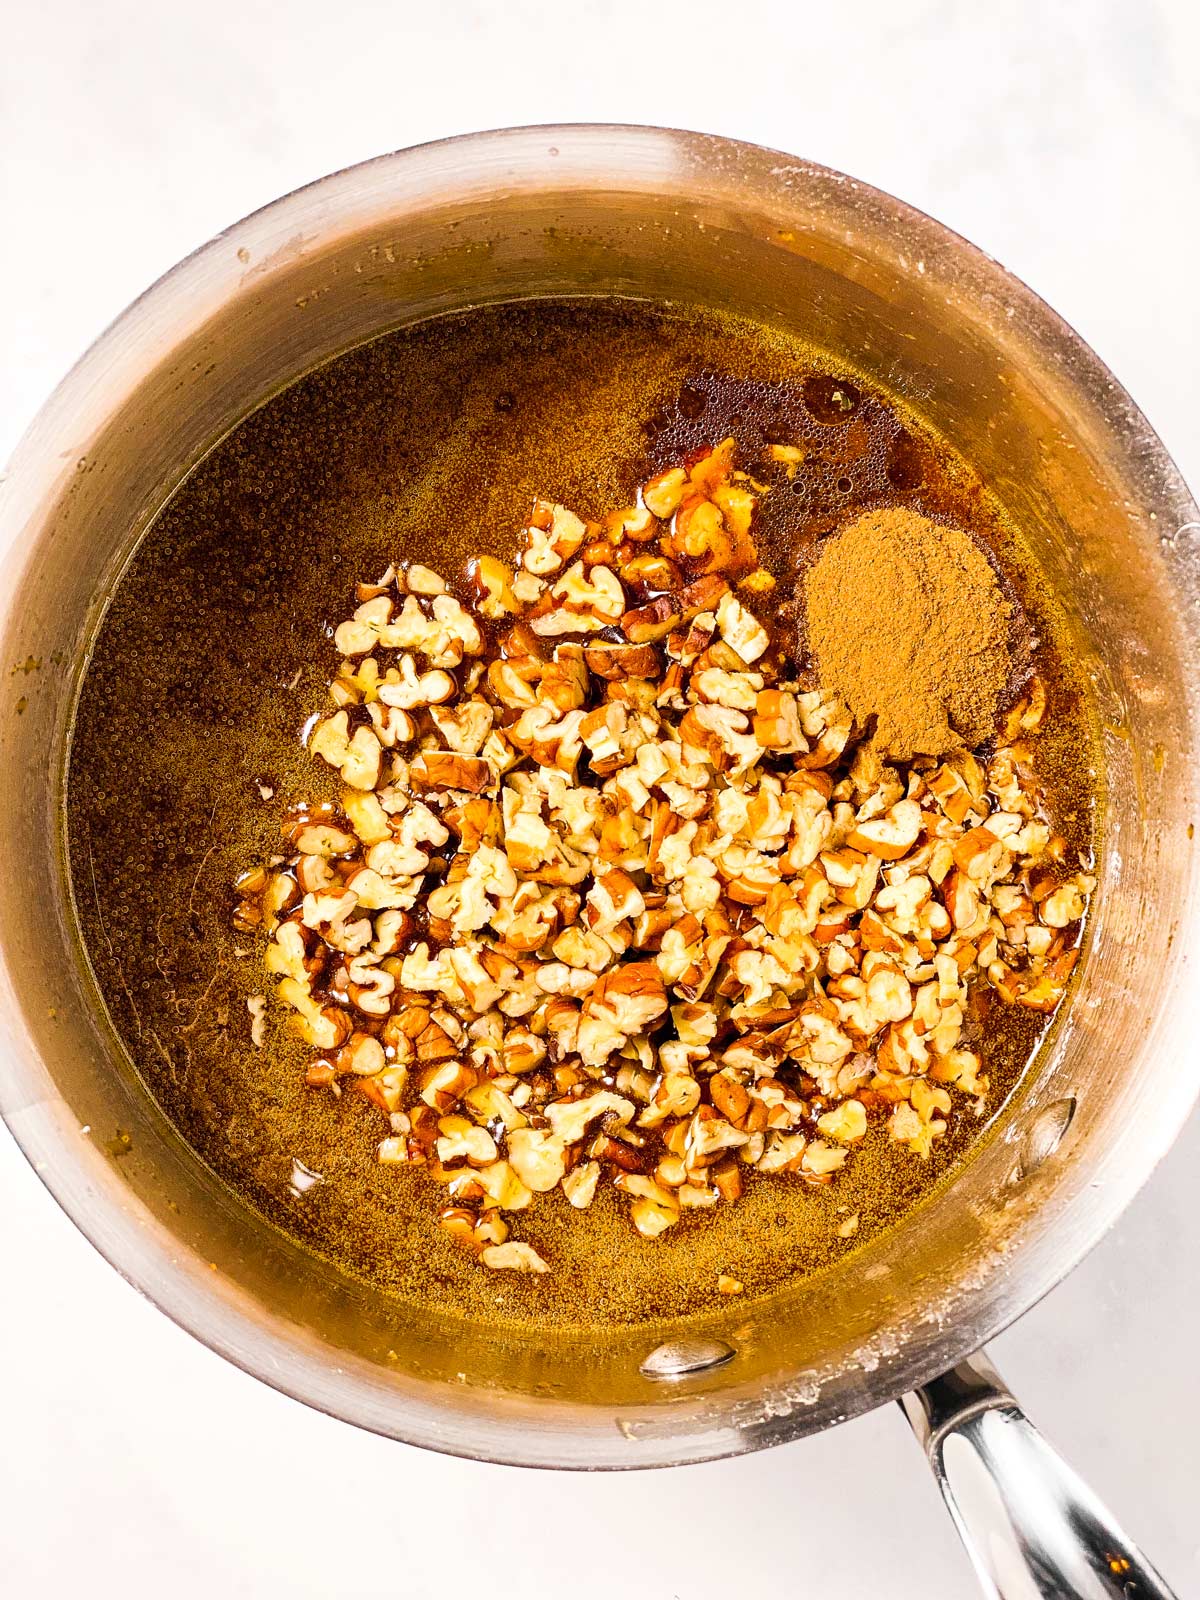 caramel sauce with pecans and cinnamon